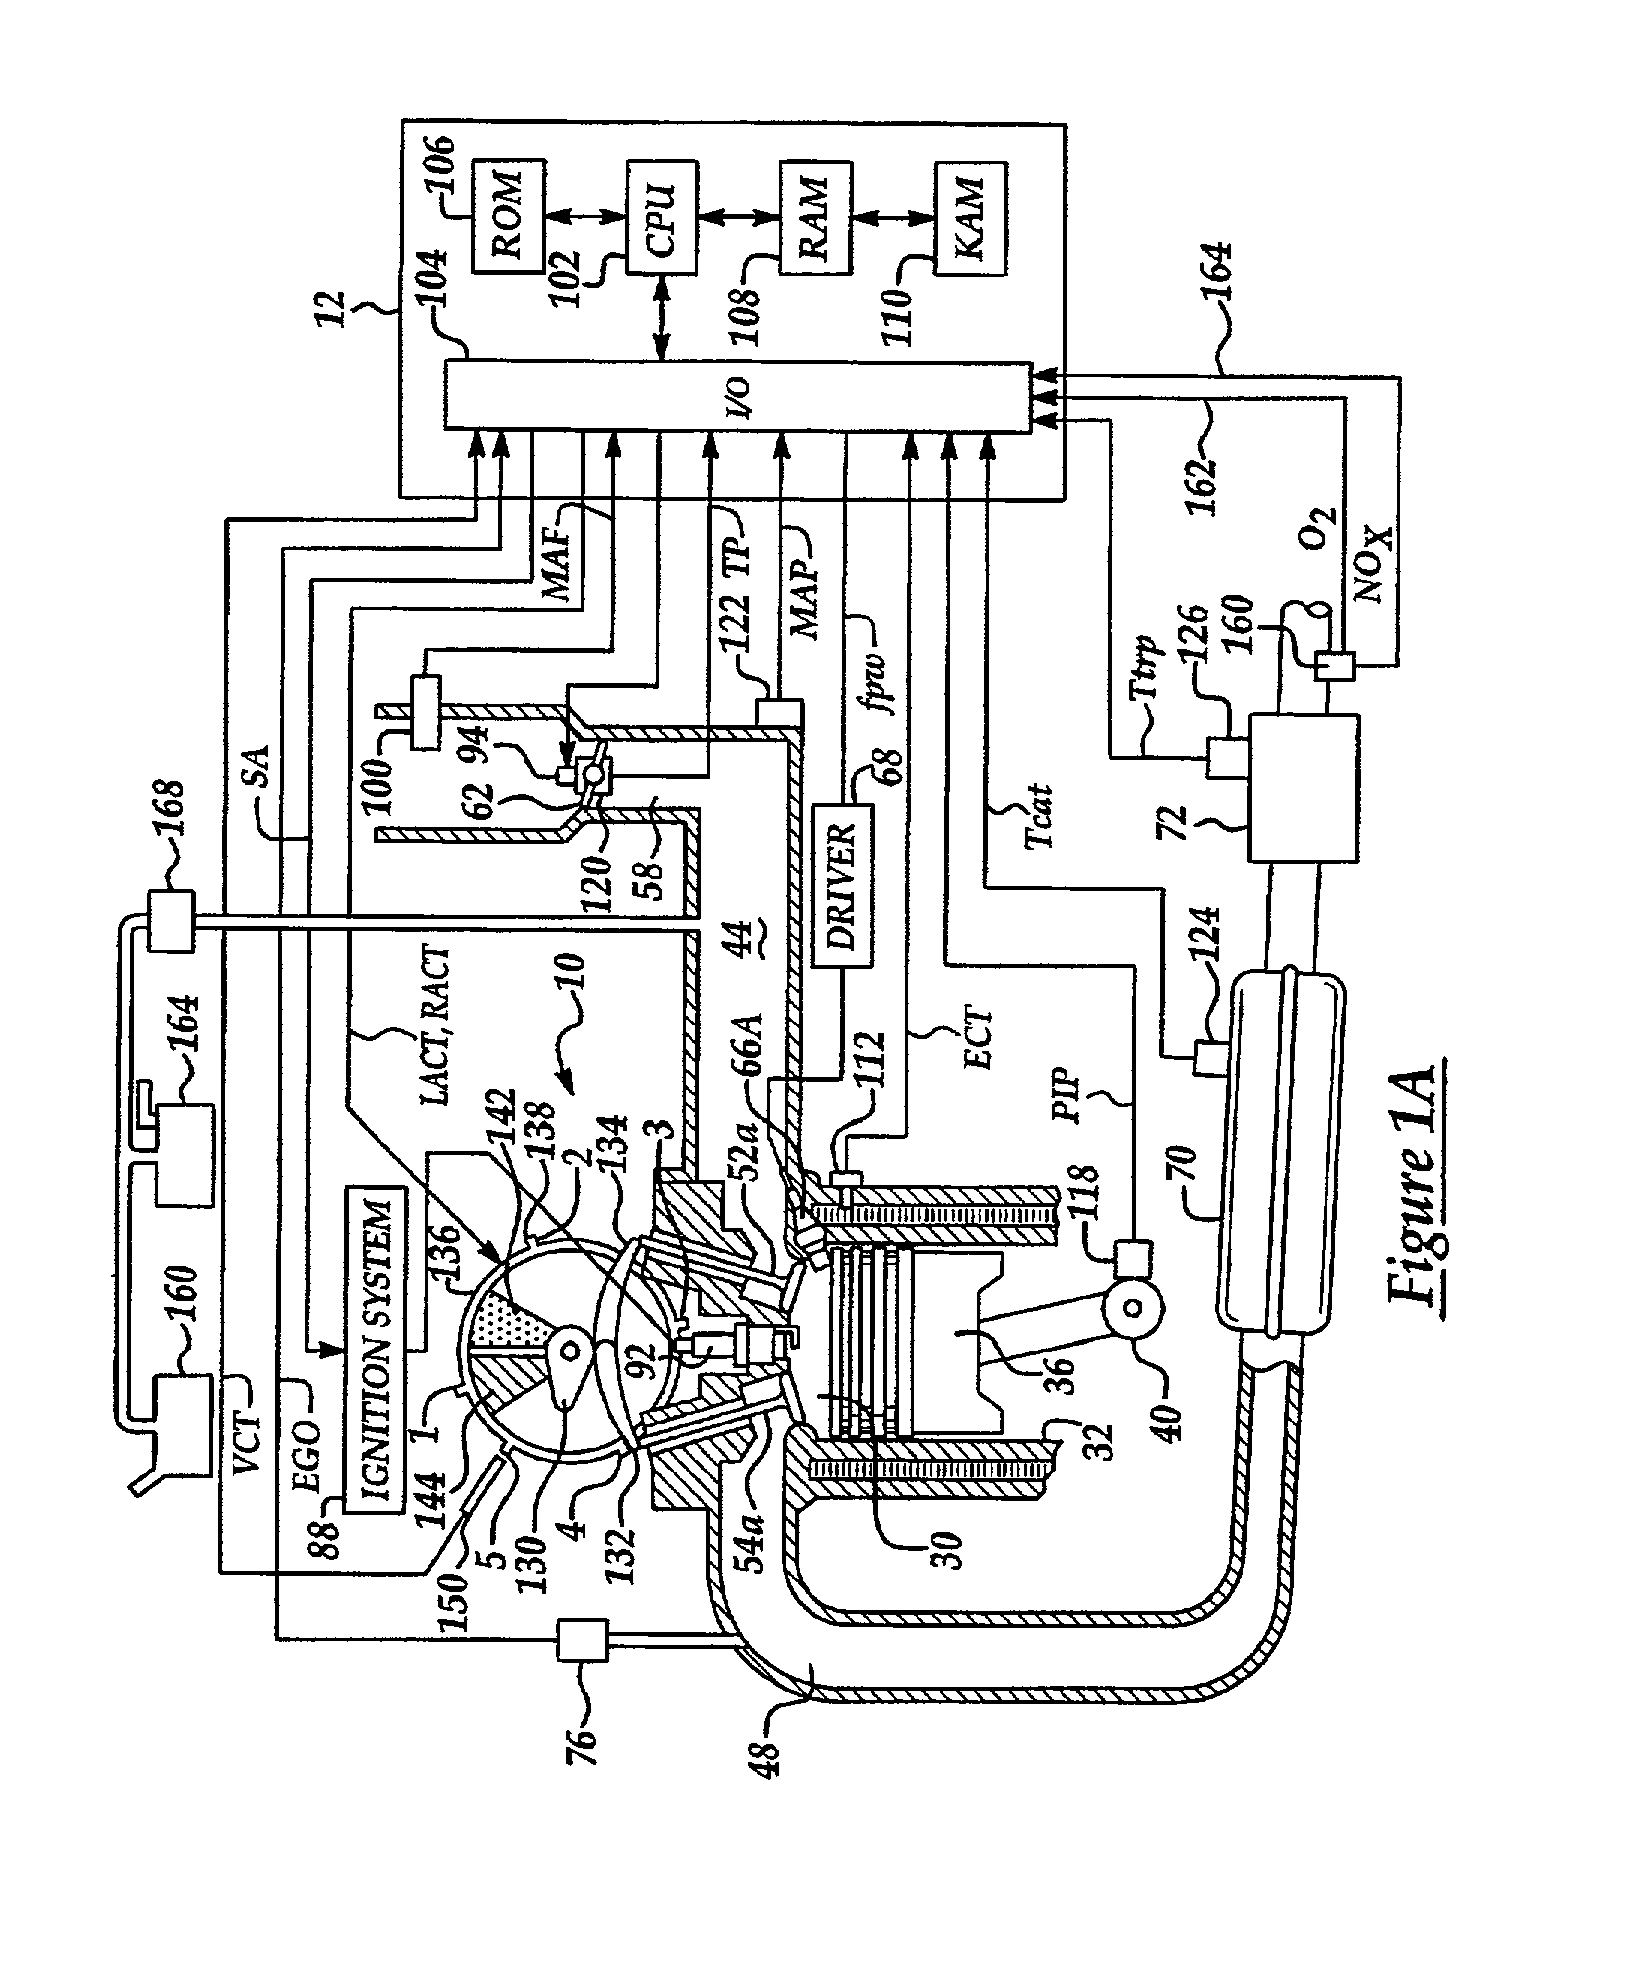 Method to control transitions between modes of operation of an engine